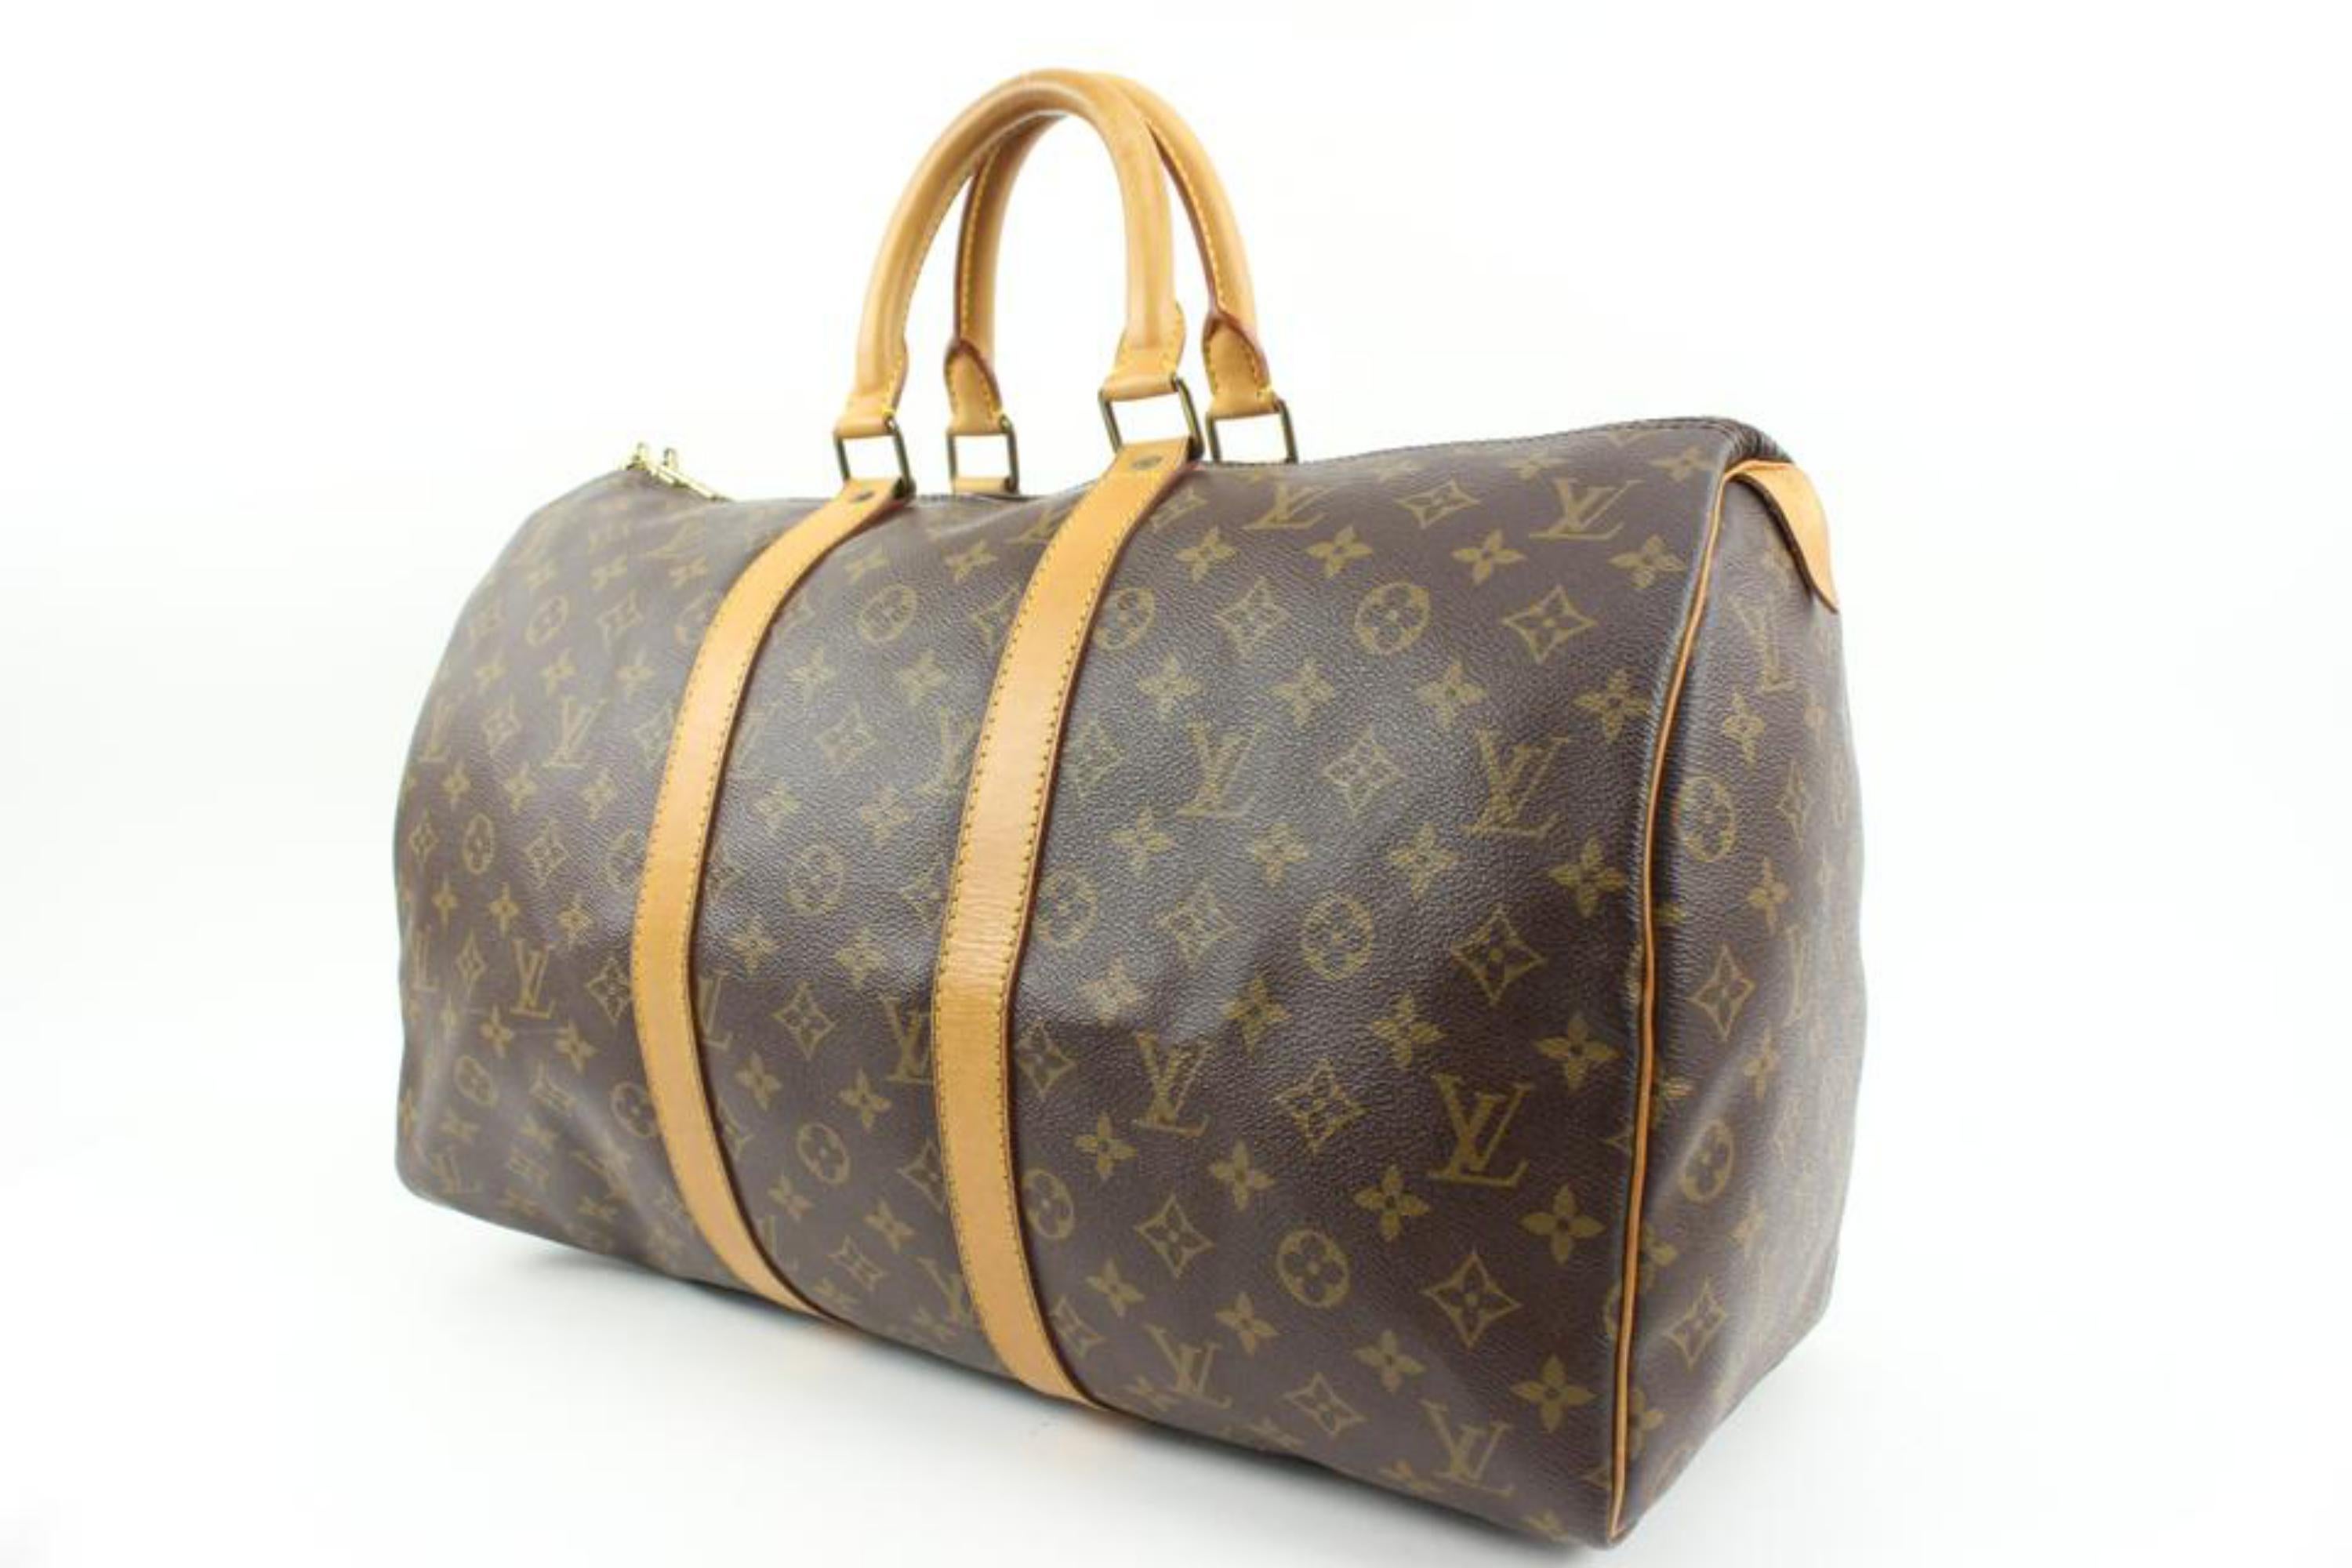 Louis Vuitton Monogram Keepall 45 Duffle Bag 7LV415a
Date Code/Serial Number: SP0971
Made In: France
Measurements: Length:  18